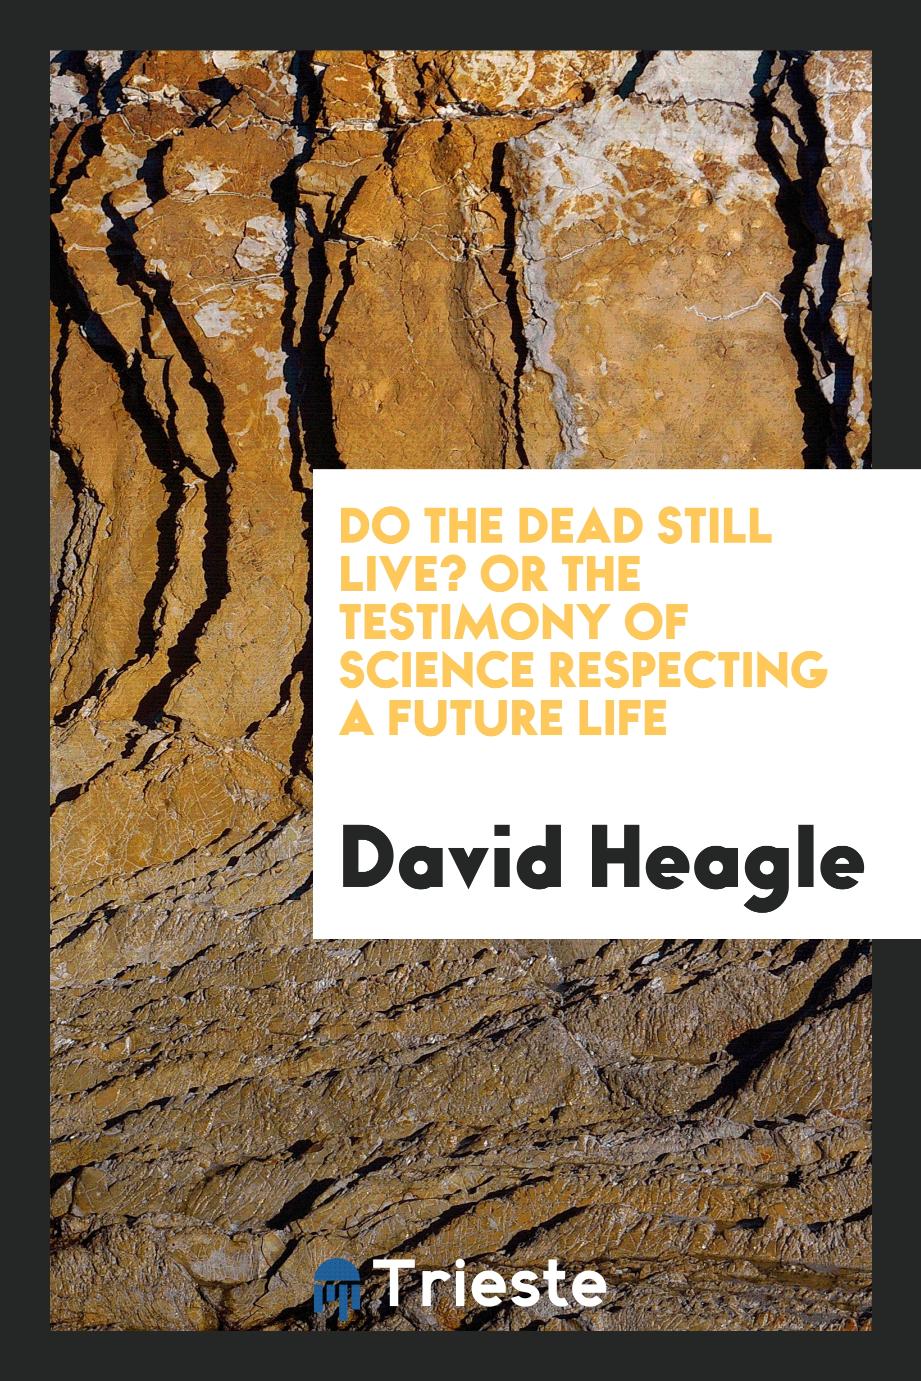 Do the dead still live? or the testimony of science respecting a future life